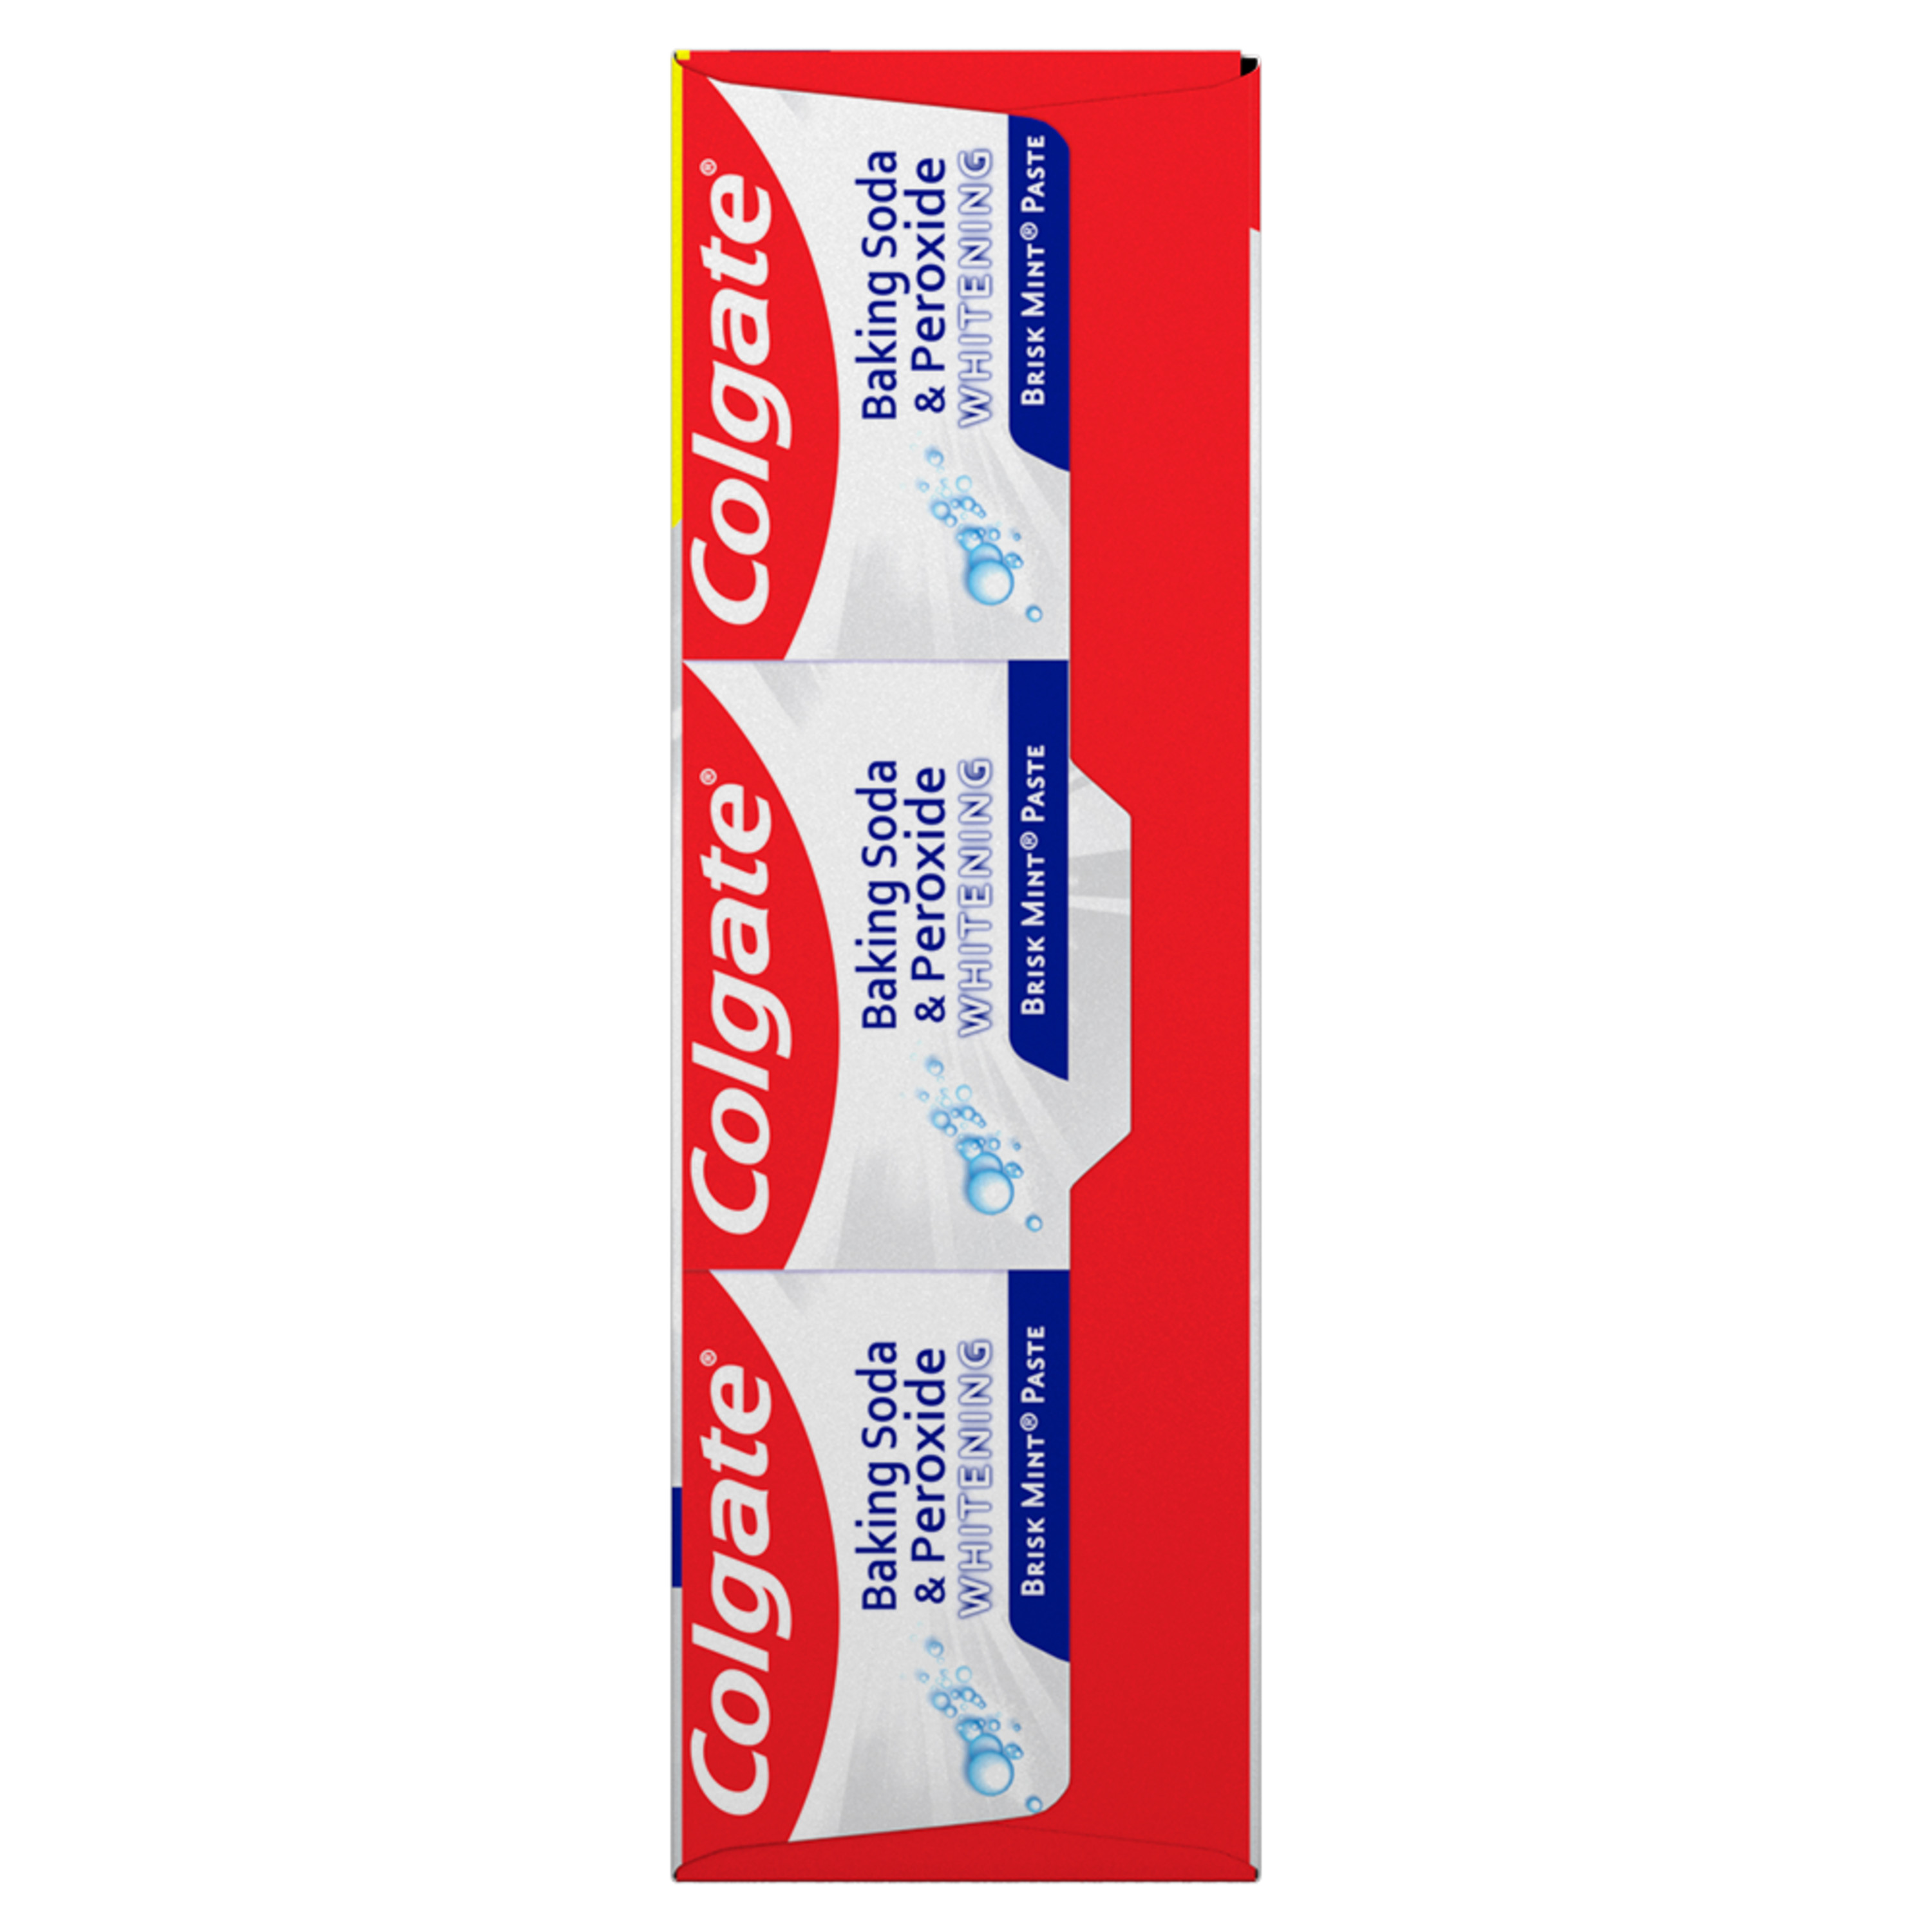 Colgate Baking Soda and Peroxide Whitening Toothpaste, Brisk Mint, 3 Pack - image 5 of 5